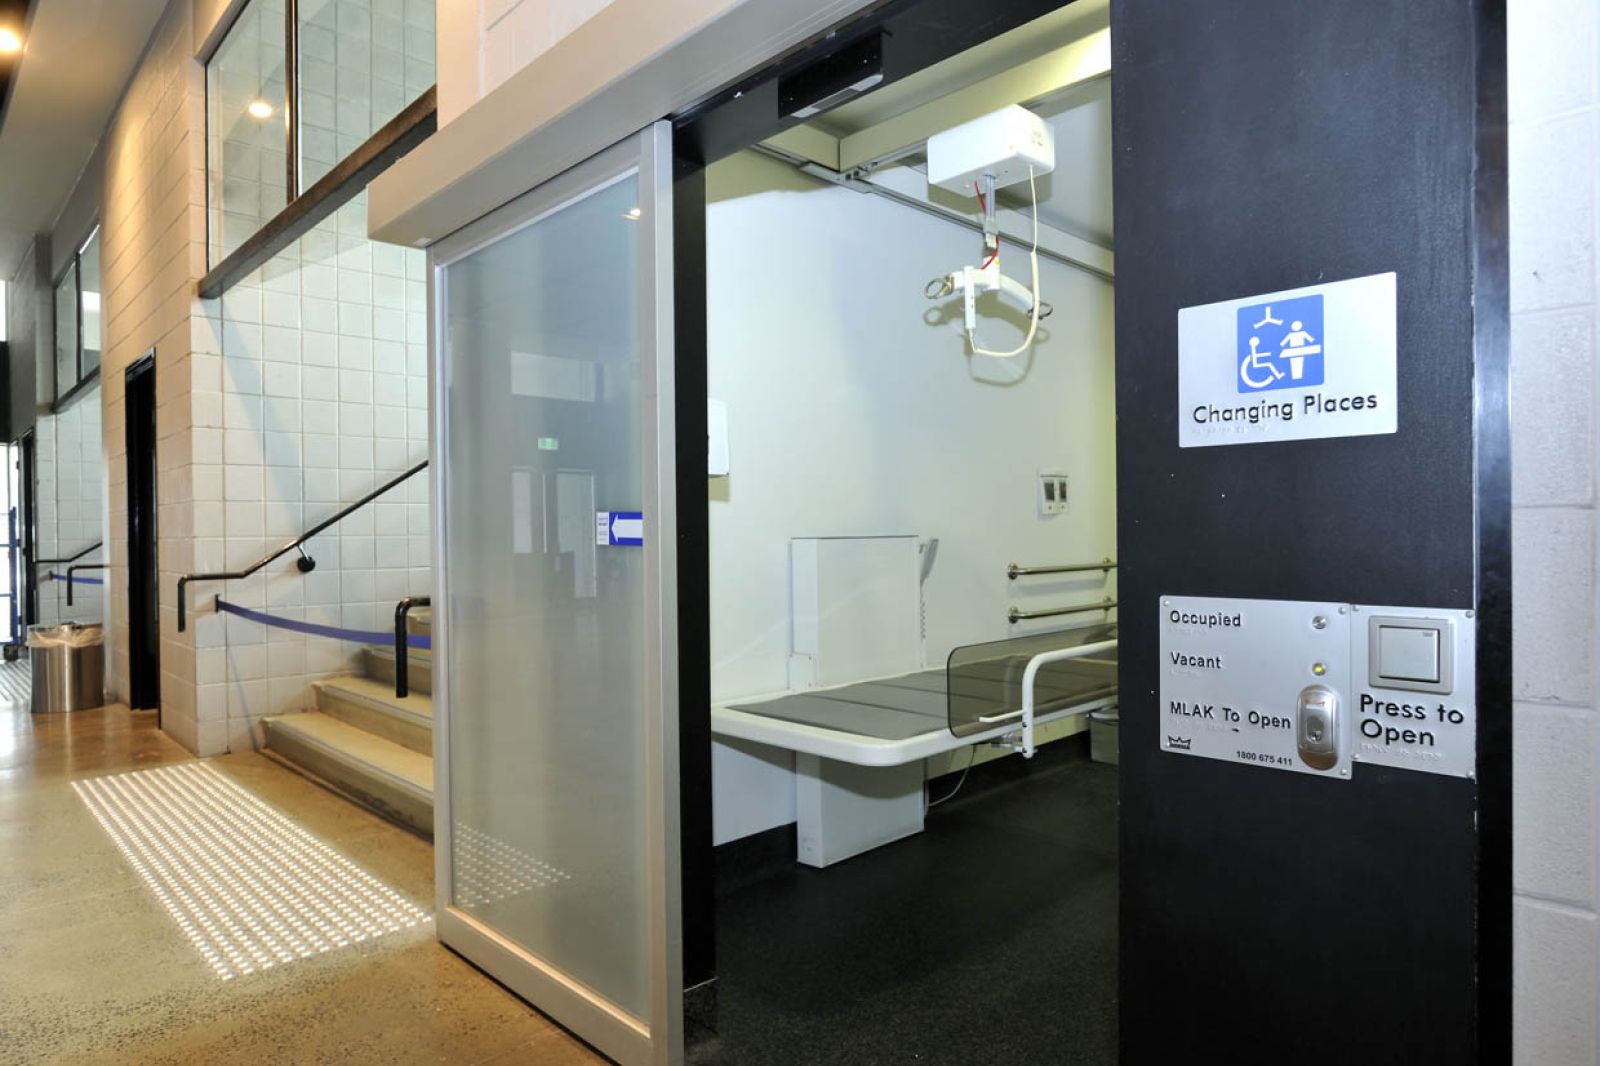 Perth Children's Hospital, Wheelchair Accessible Change Facility